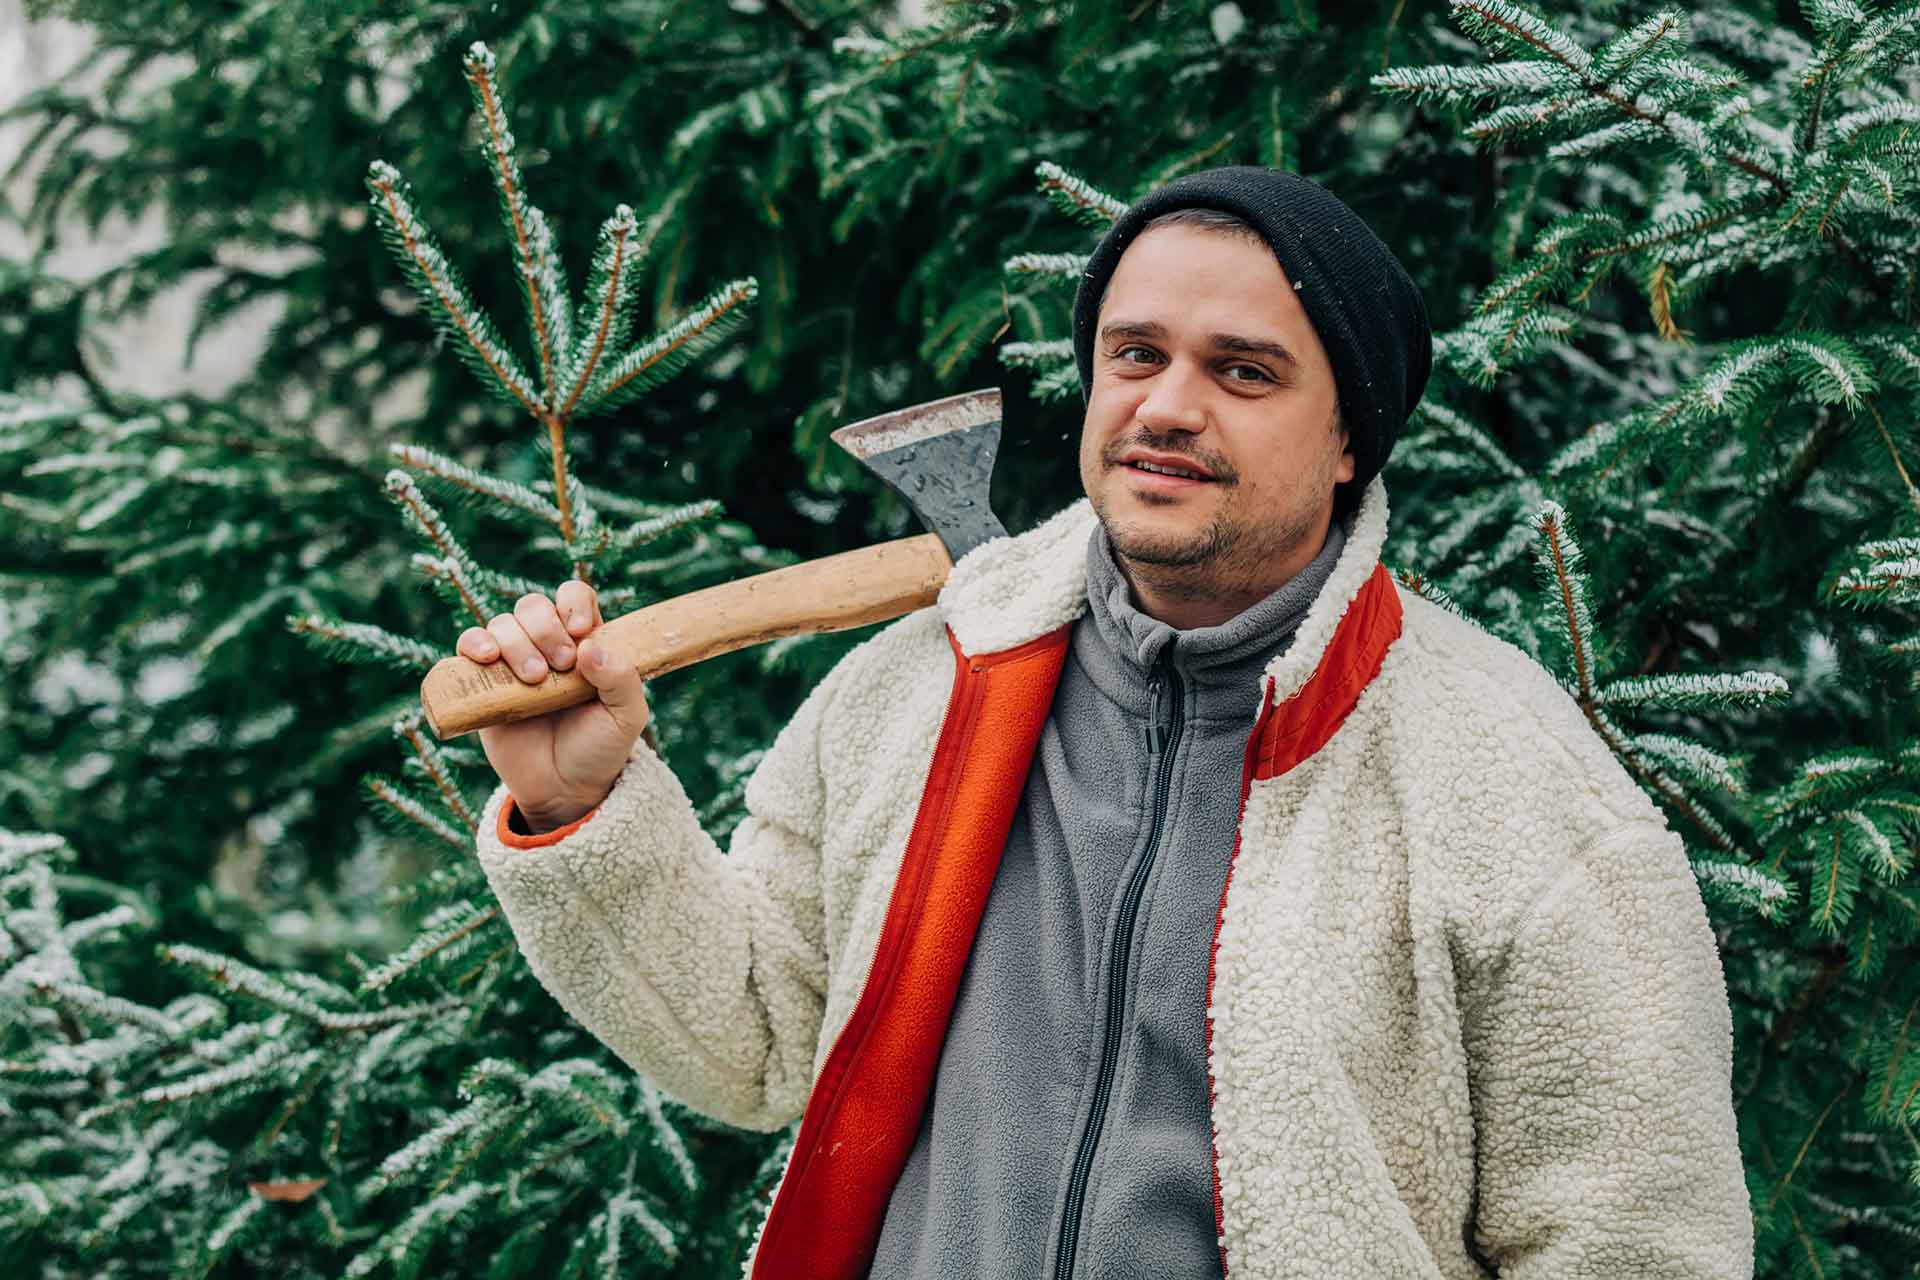 A man is holding an axe next to the Christmas tree.